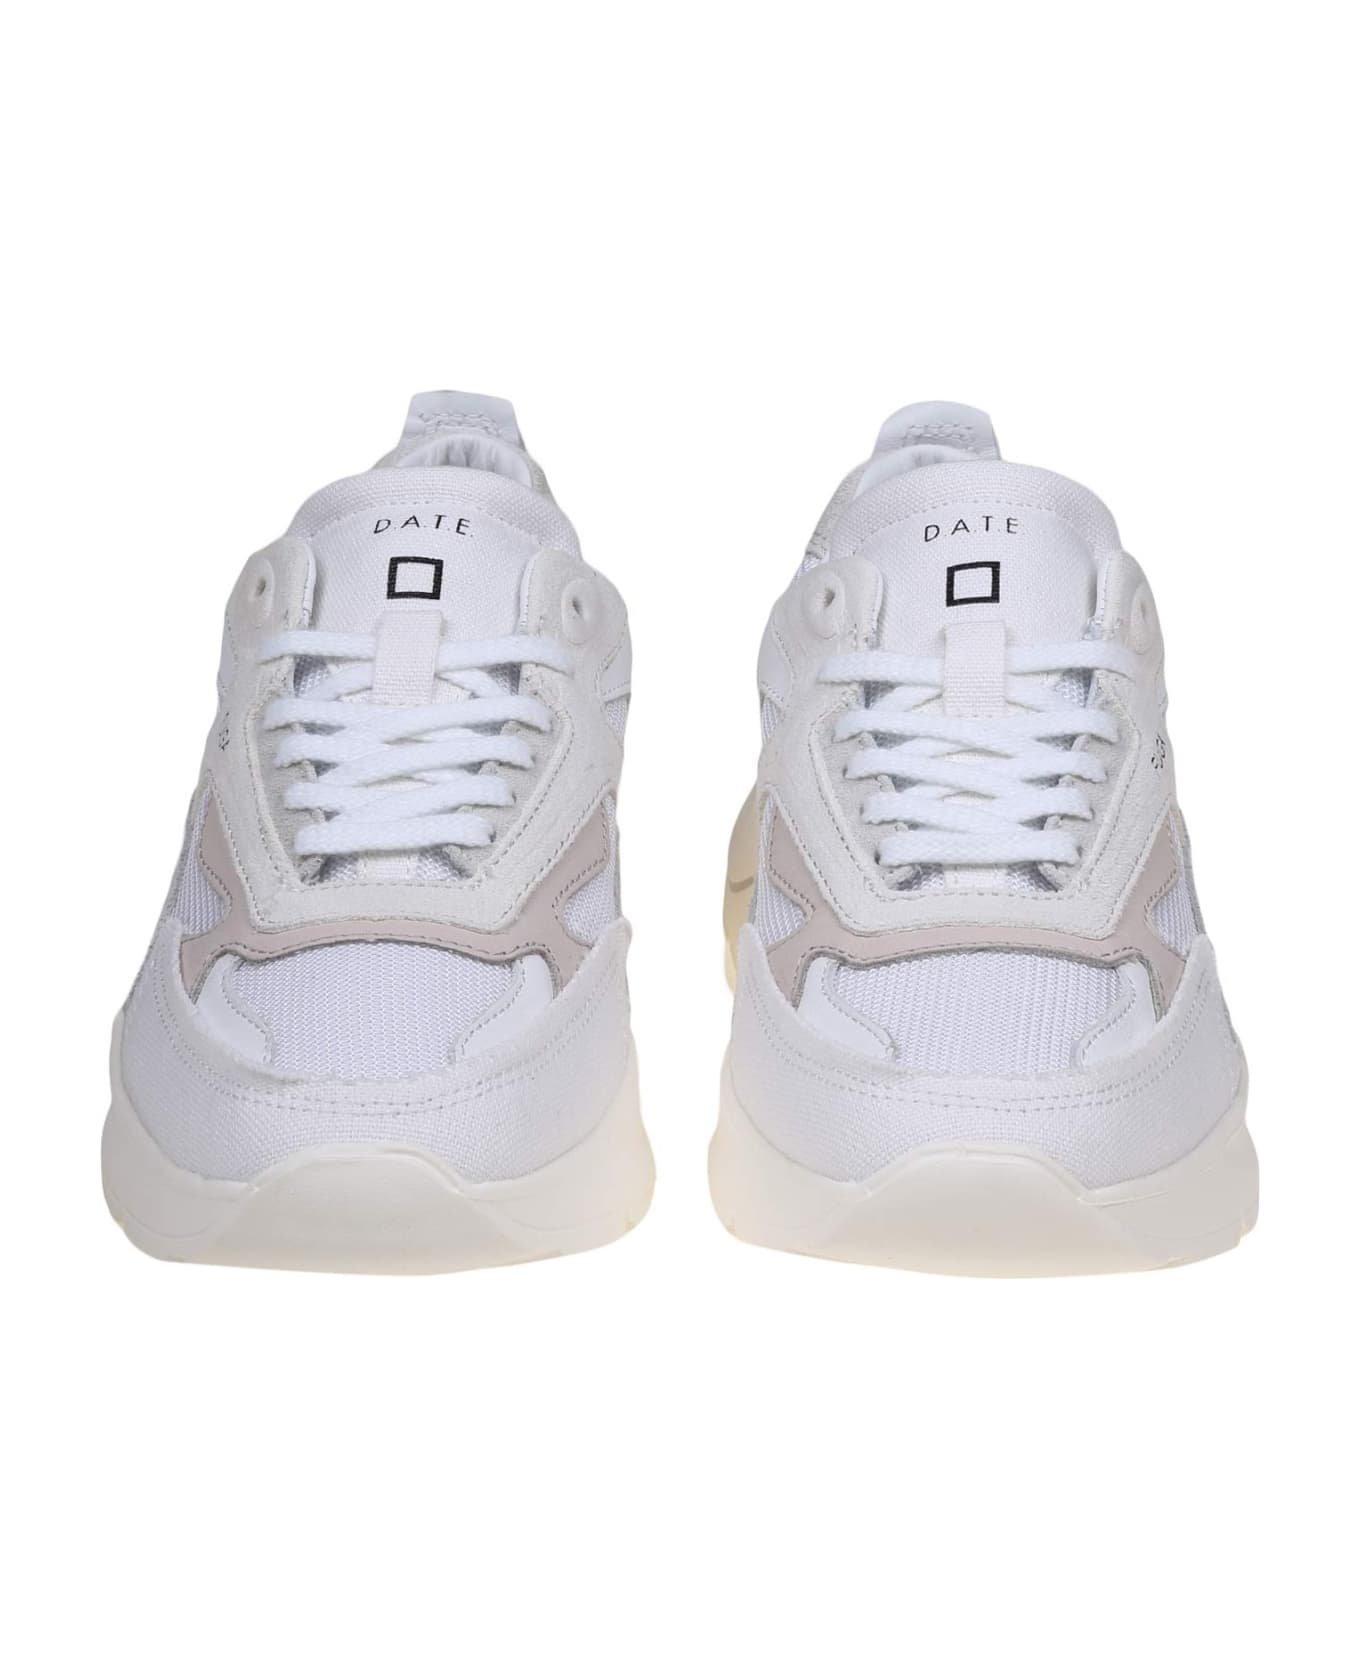 D.A.T.E. Fuga Sneakers In White Leather And Fabric - White